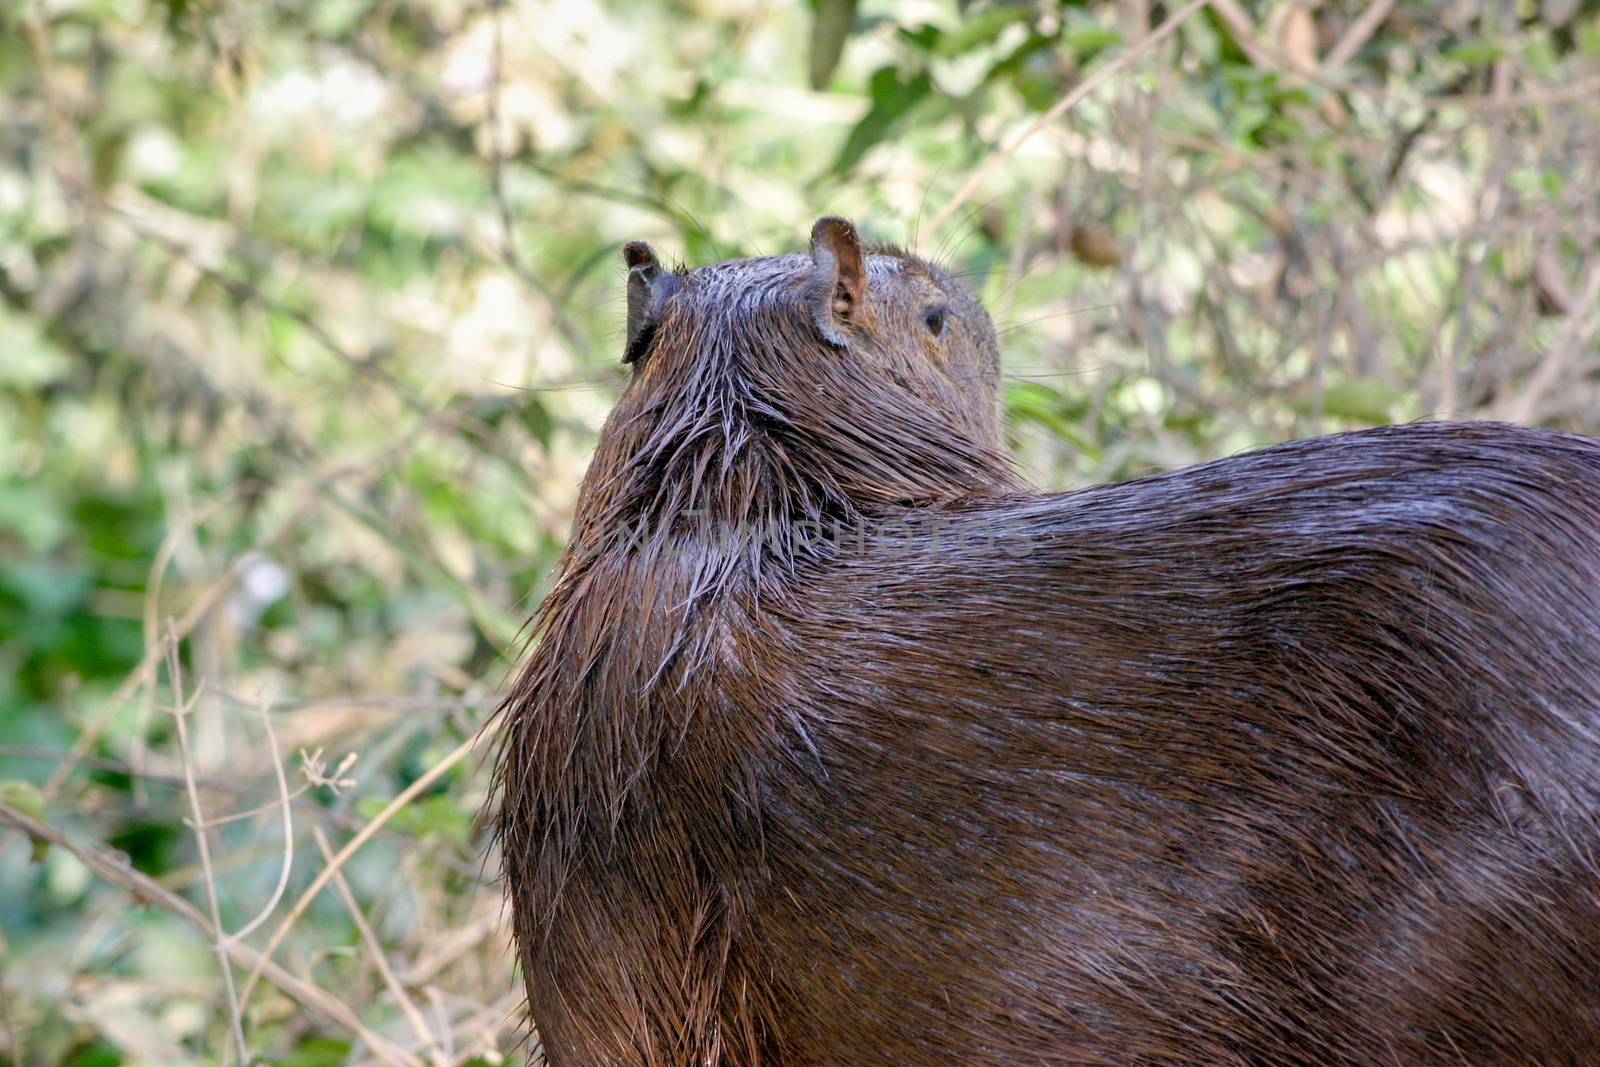 A Capybara in the Pantanal region of Brazil by magicbones